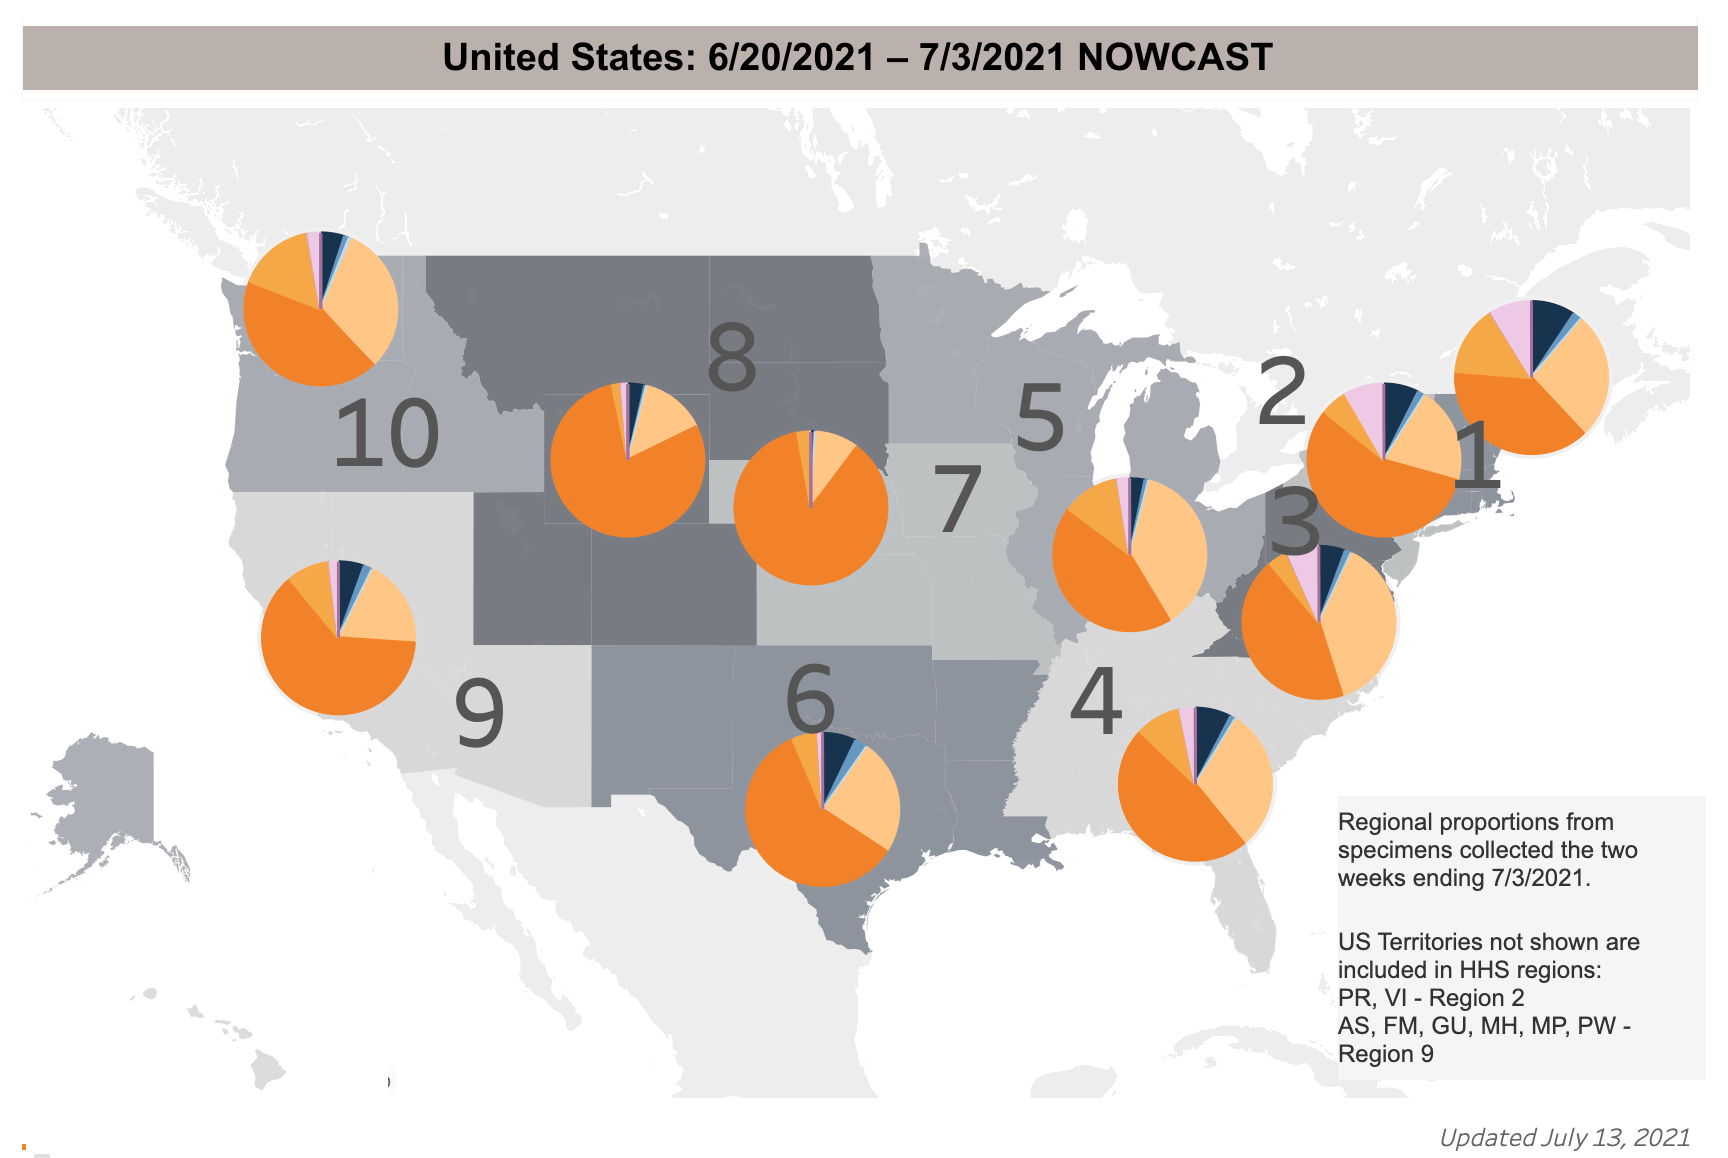 [CREDIT: CDC] The COVID-19 Delta variant is the most dominant in the U.S. now. It is also more contagious and virulent. Above, a CDC map of the percent spread of COVID-19 variants. The Delta variant is marked in dark orange. In region 1, including RI, CT, MA, NH, VT, and ME, the percent cases that are Delta variant is 11.6%.